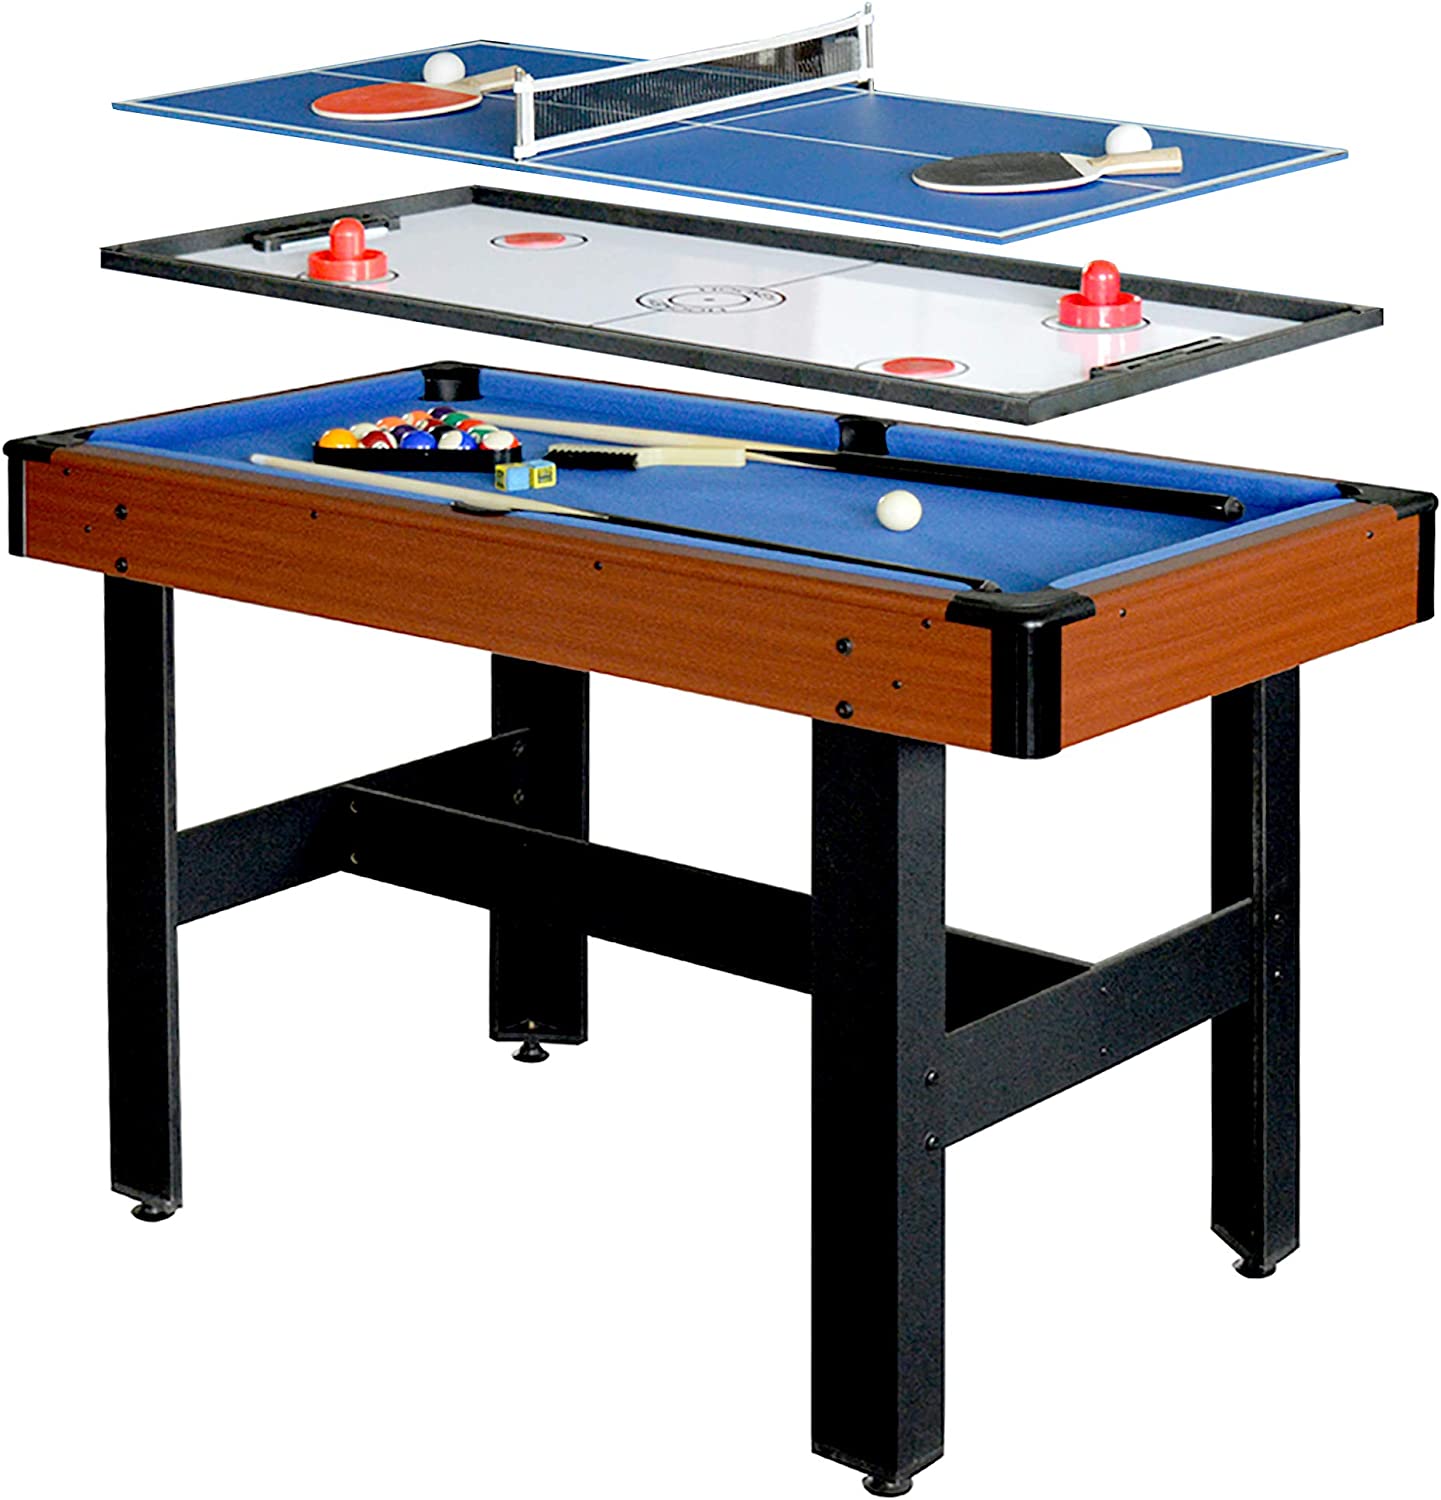 Hathaway BG1131M Triad 3-in-1 48-in Multi Game Table with Pool, Glide Hockey, and Table Tennis for Family Game Rooms,Blue